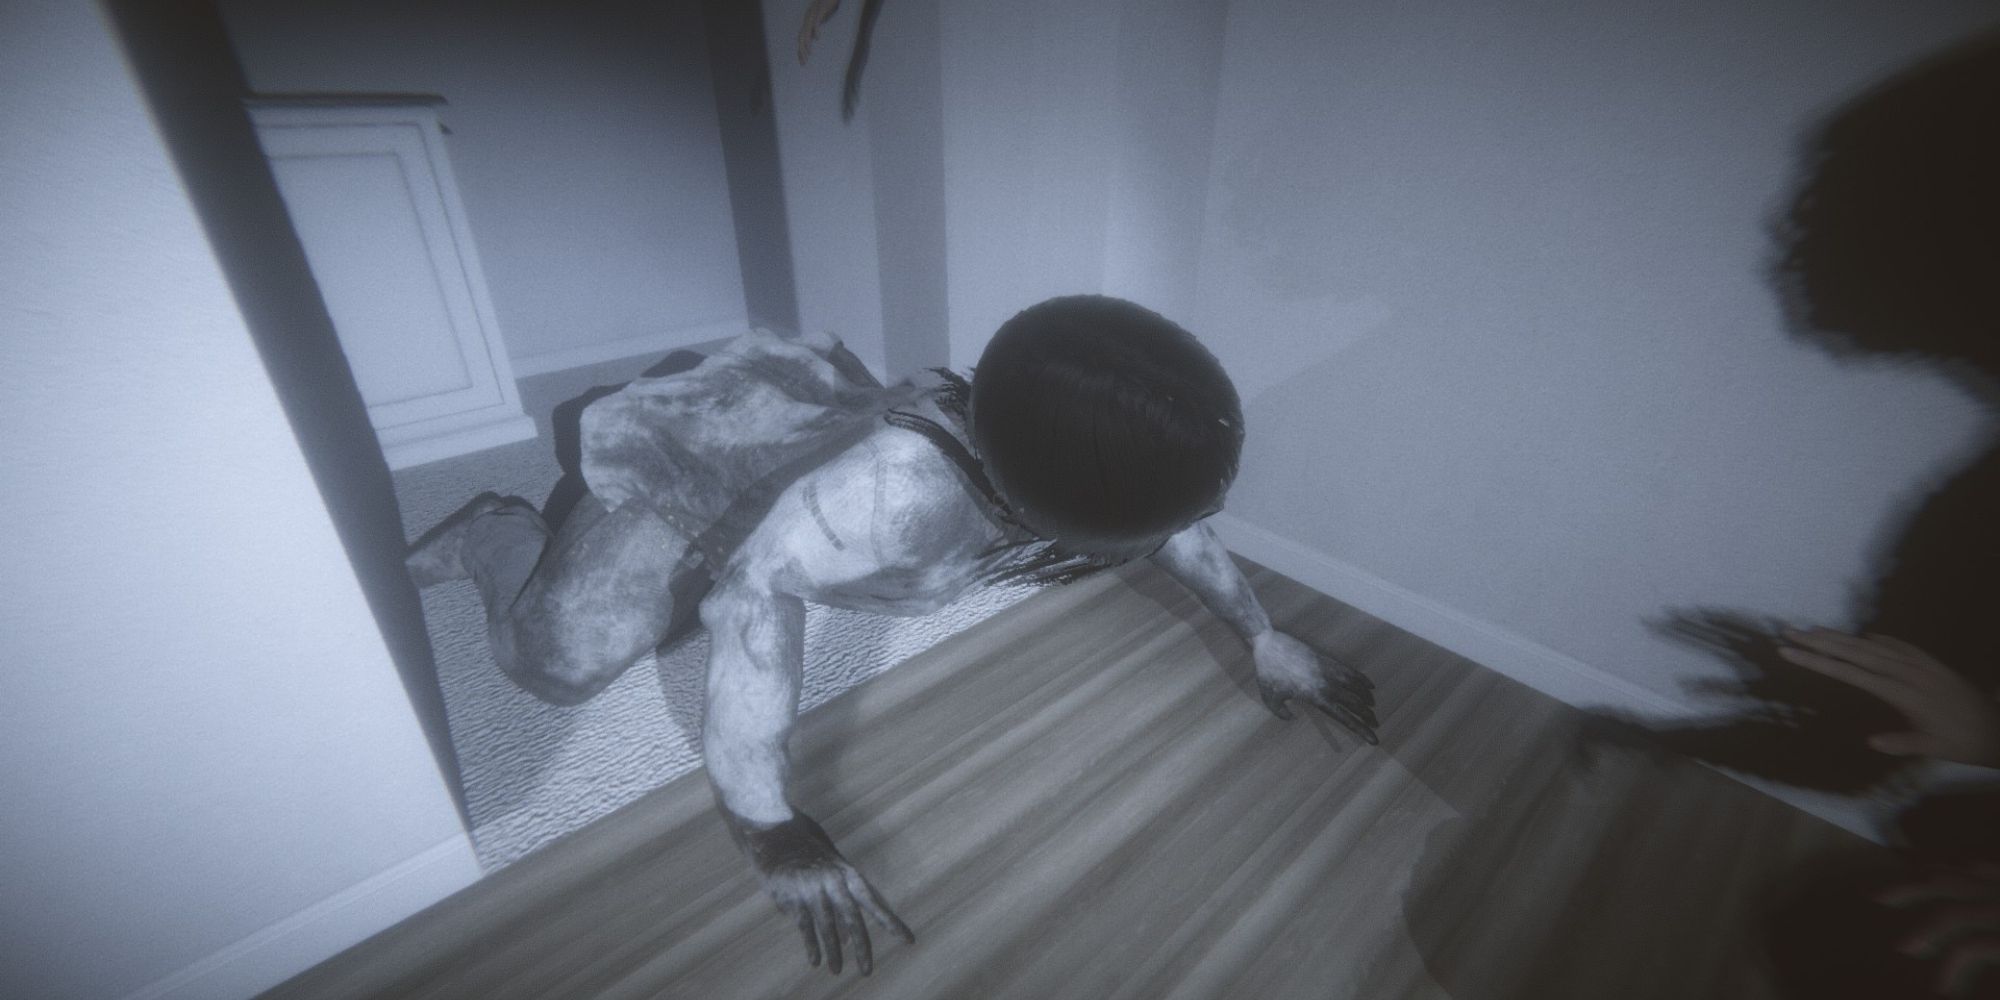 Phasmophobia patient 07 ghost crawling on the floor towards a player